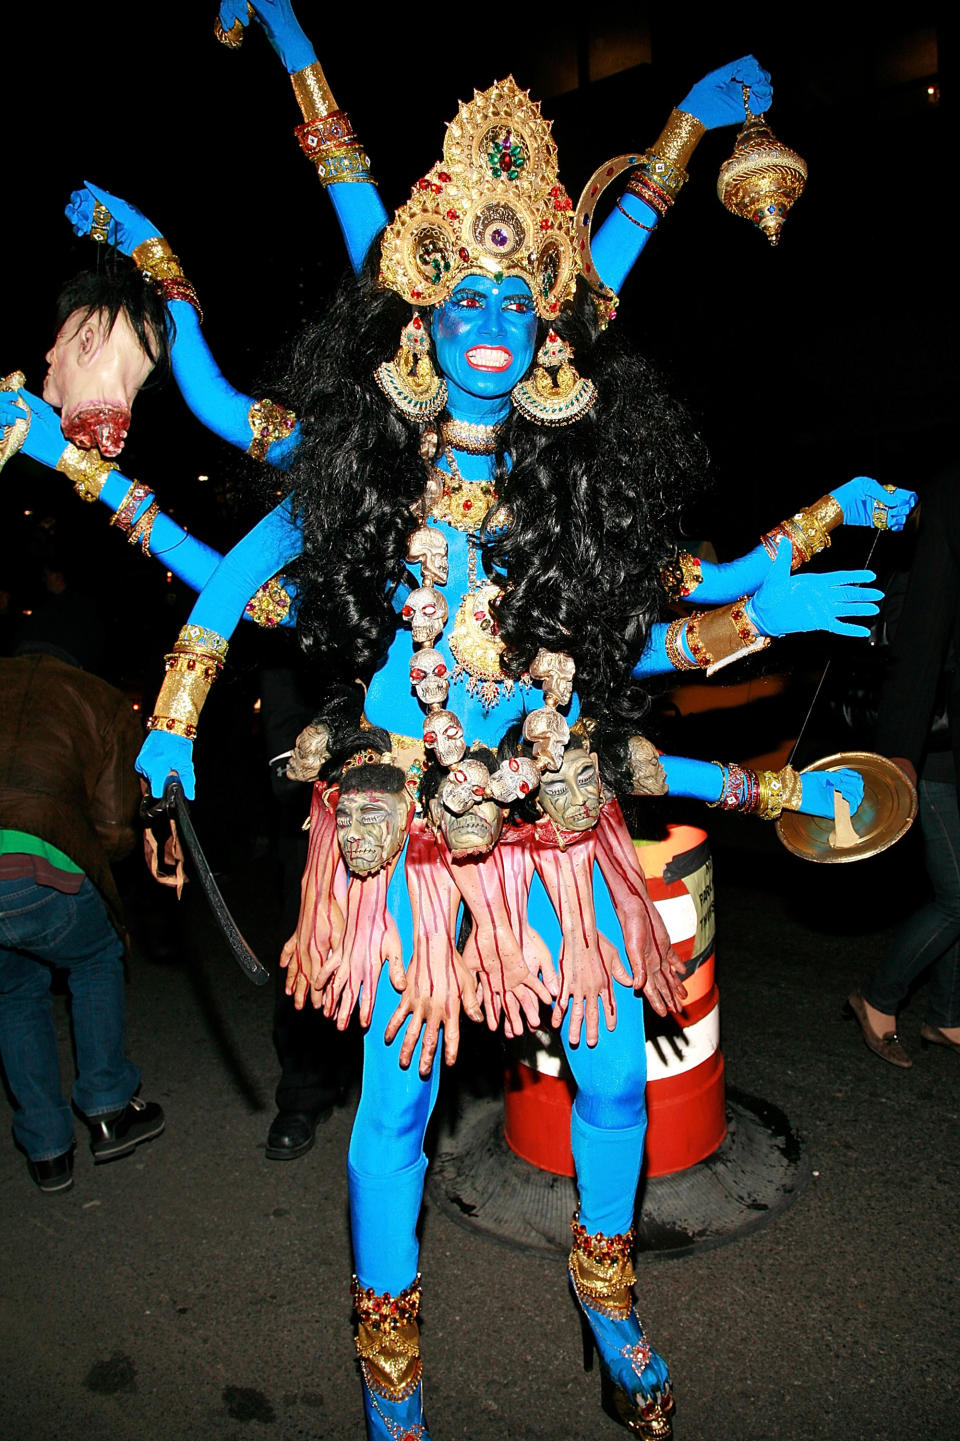 <p>In 2008, the so-called Queen of Halloween courted controversy by dressing as Kali, the Hindu goddess of destruction. Her portrait of the deity with the vampire fangs and a skirt made of severed bloody hands upset Hindu leaders. (Photo: Charles Eshelman/Getty Images) </p>